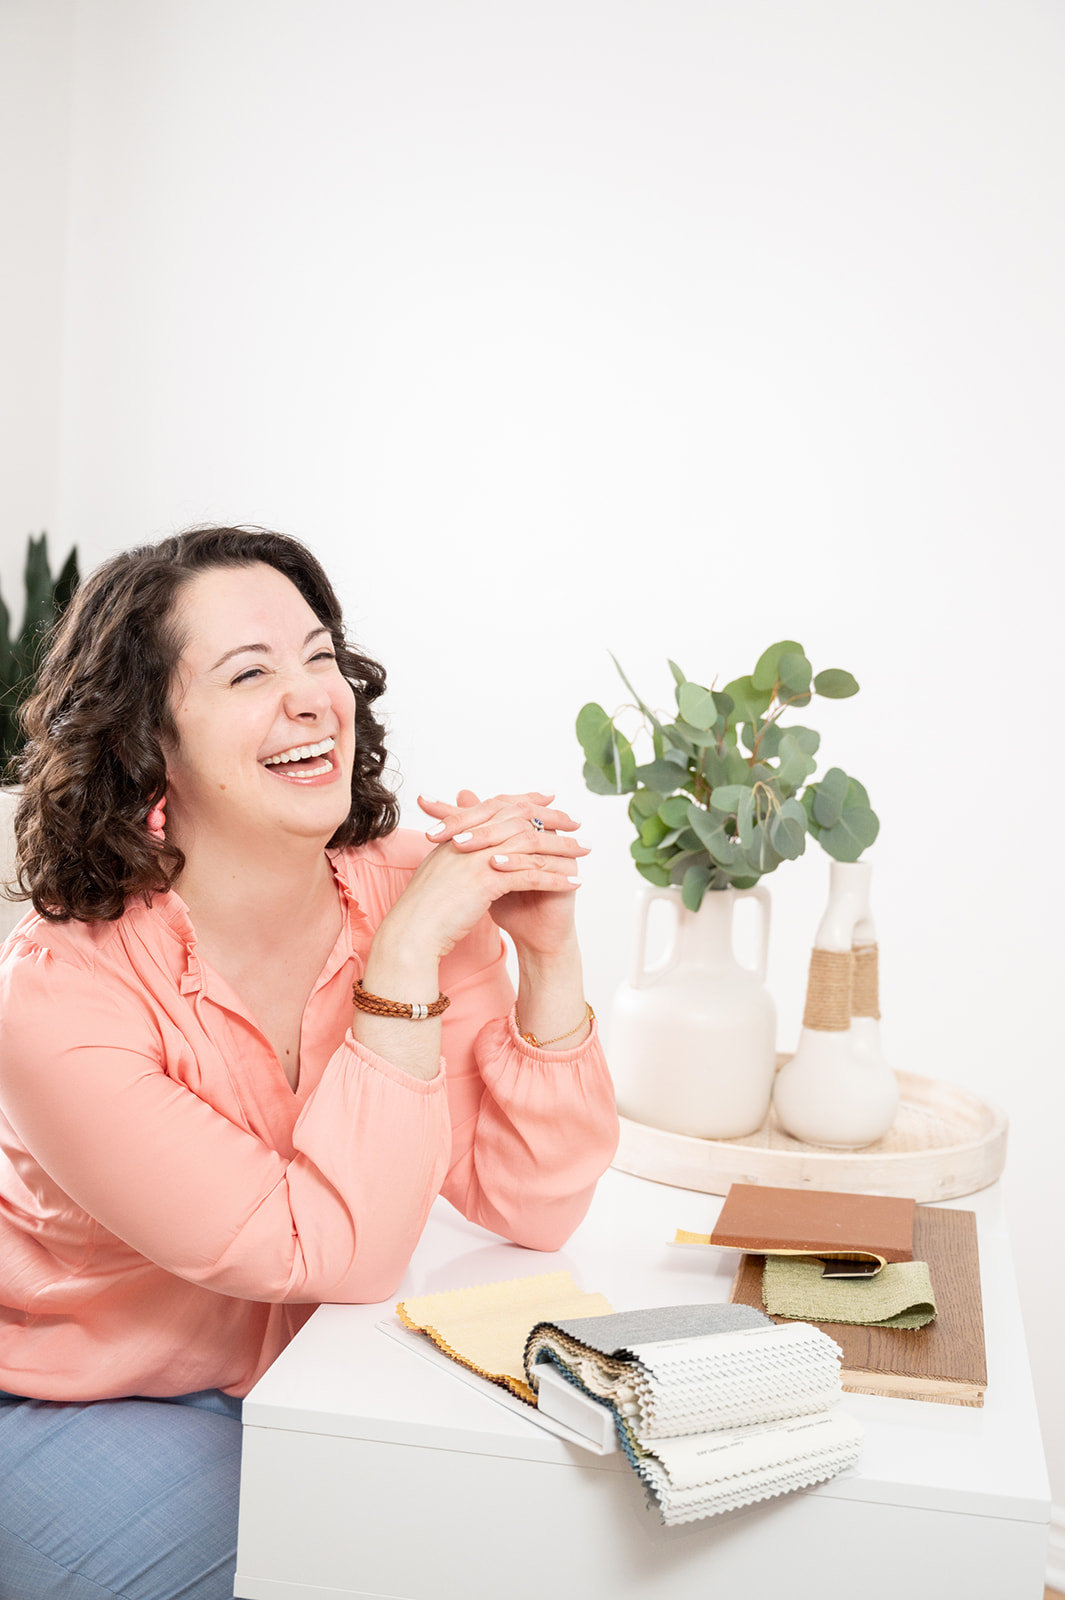 Interior designer laughing on her light and airy lifestyle branding photoshoot